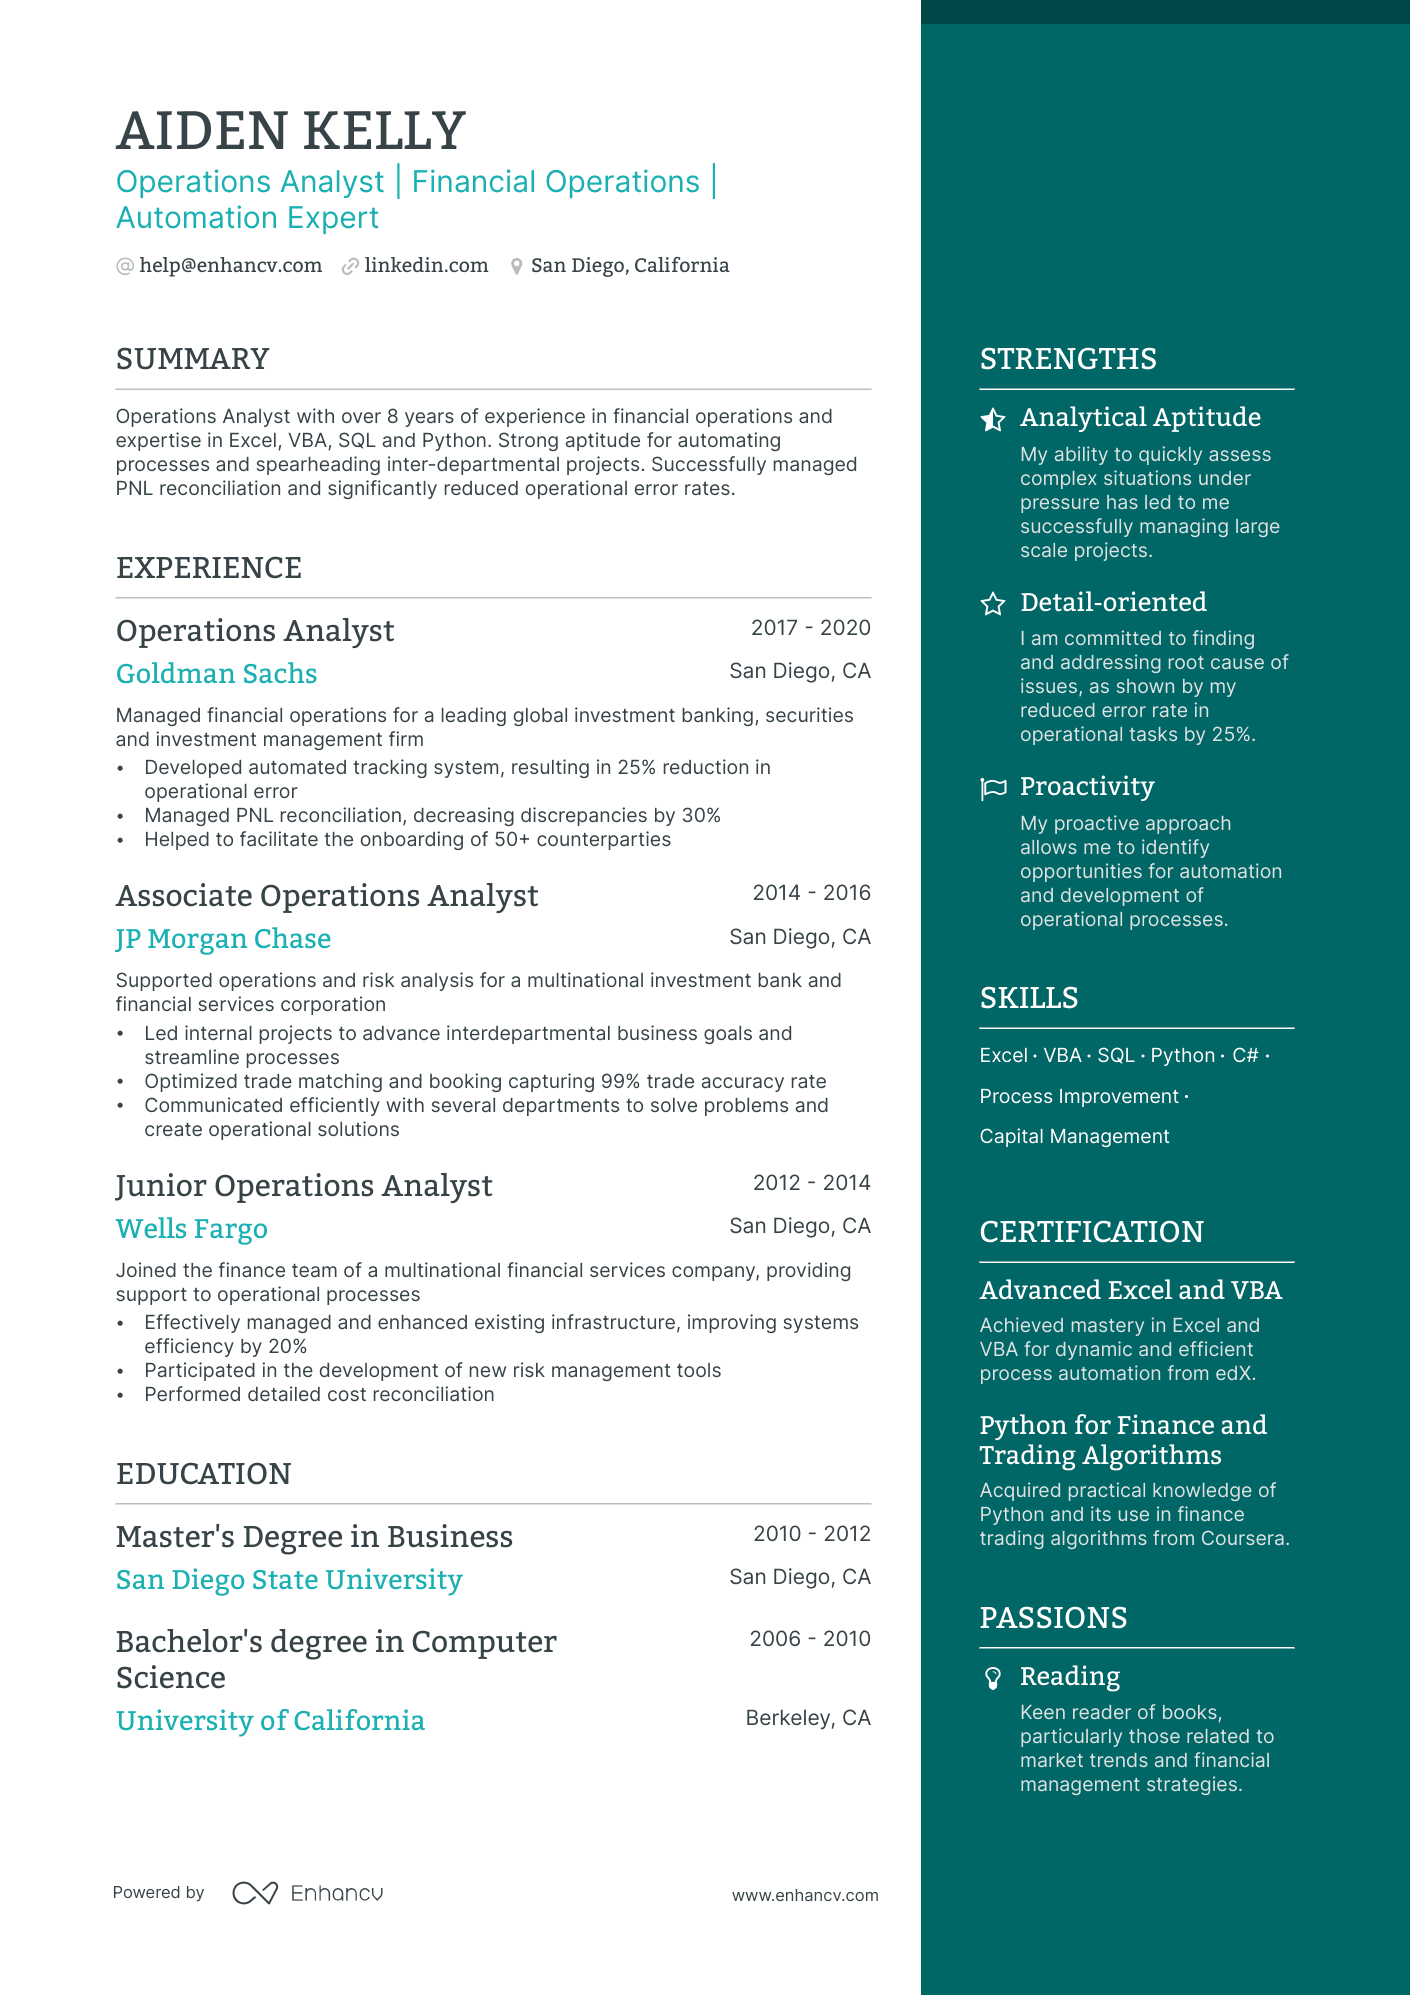 Operations Analyst resume example